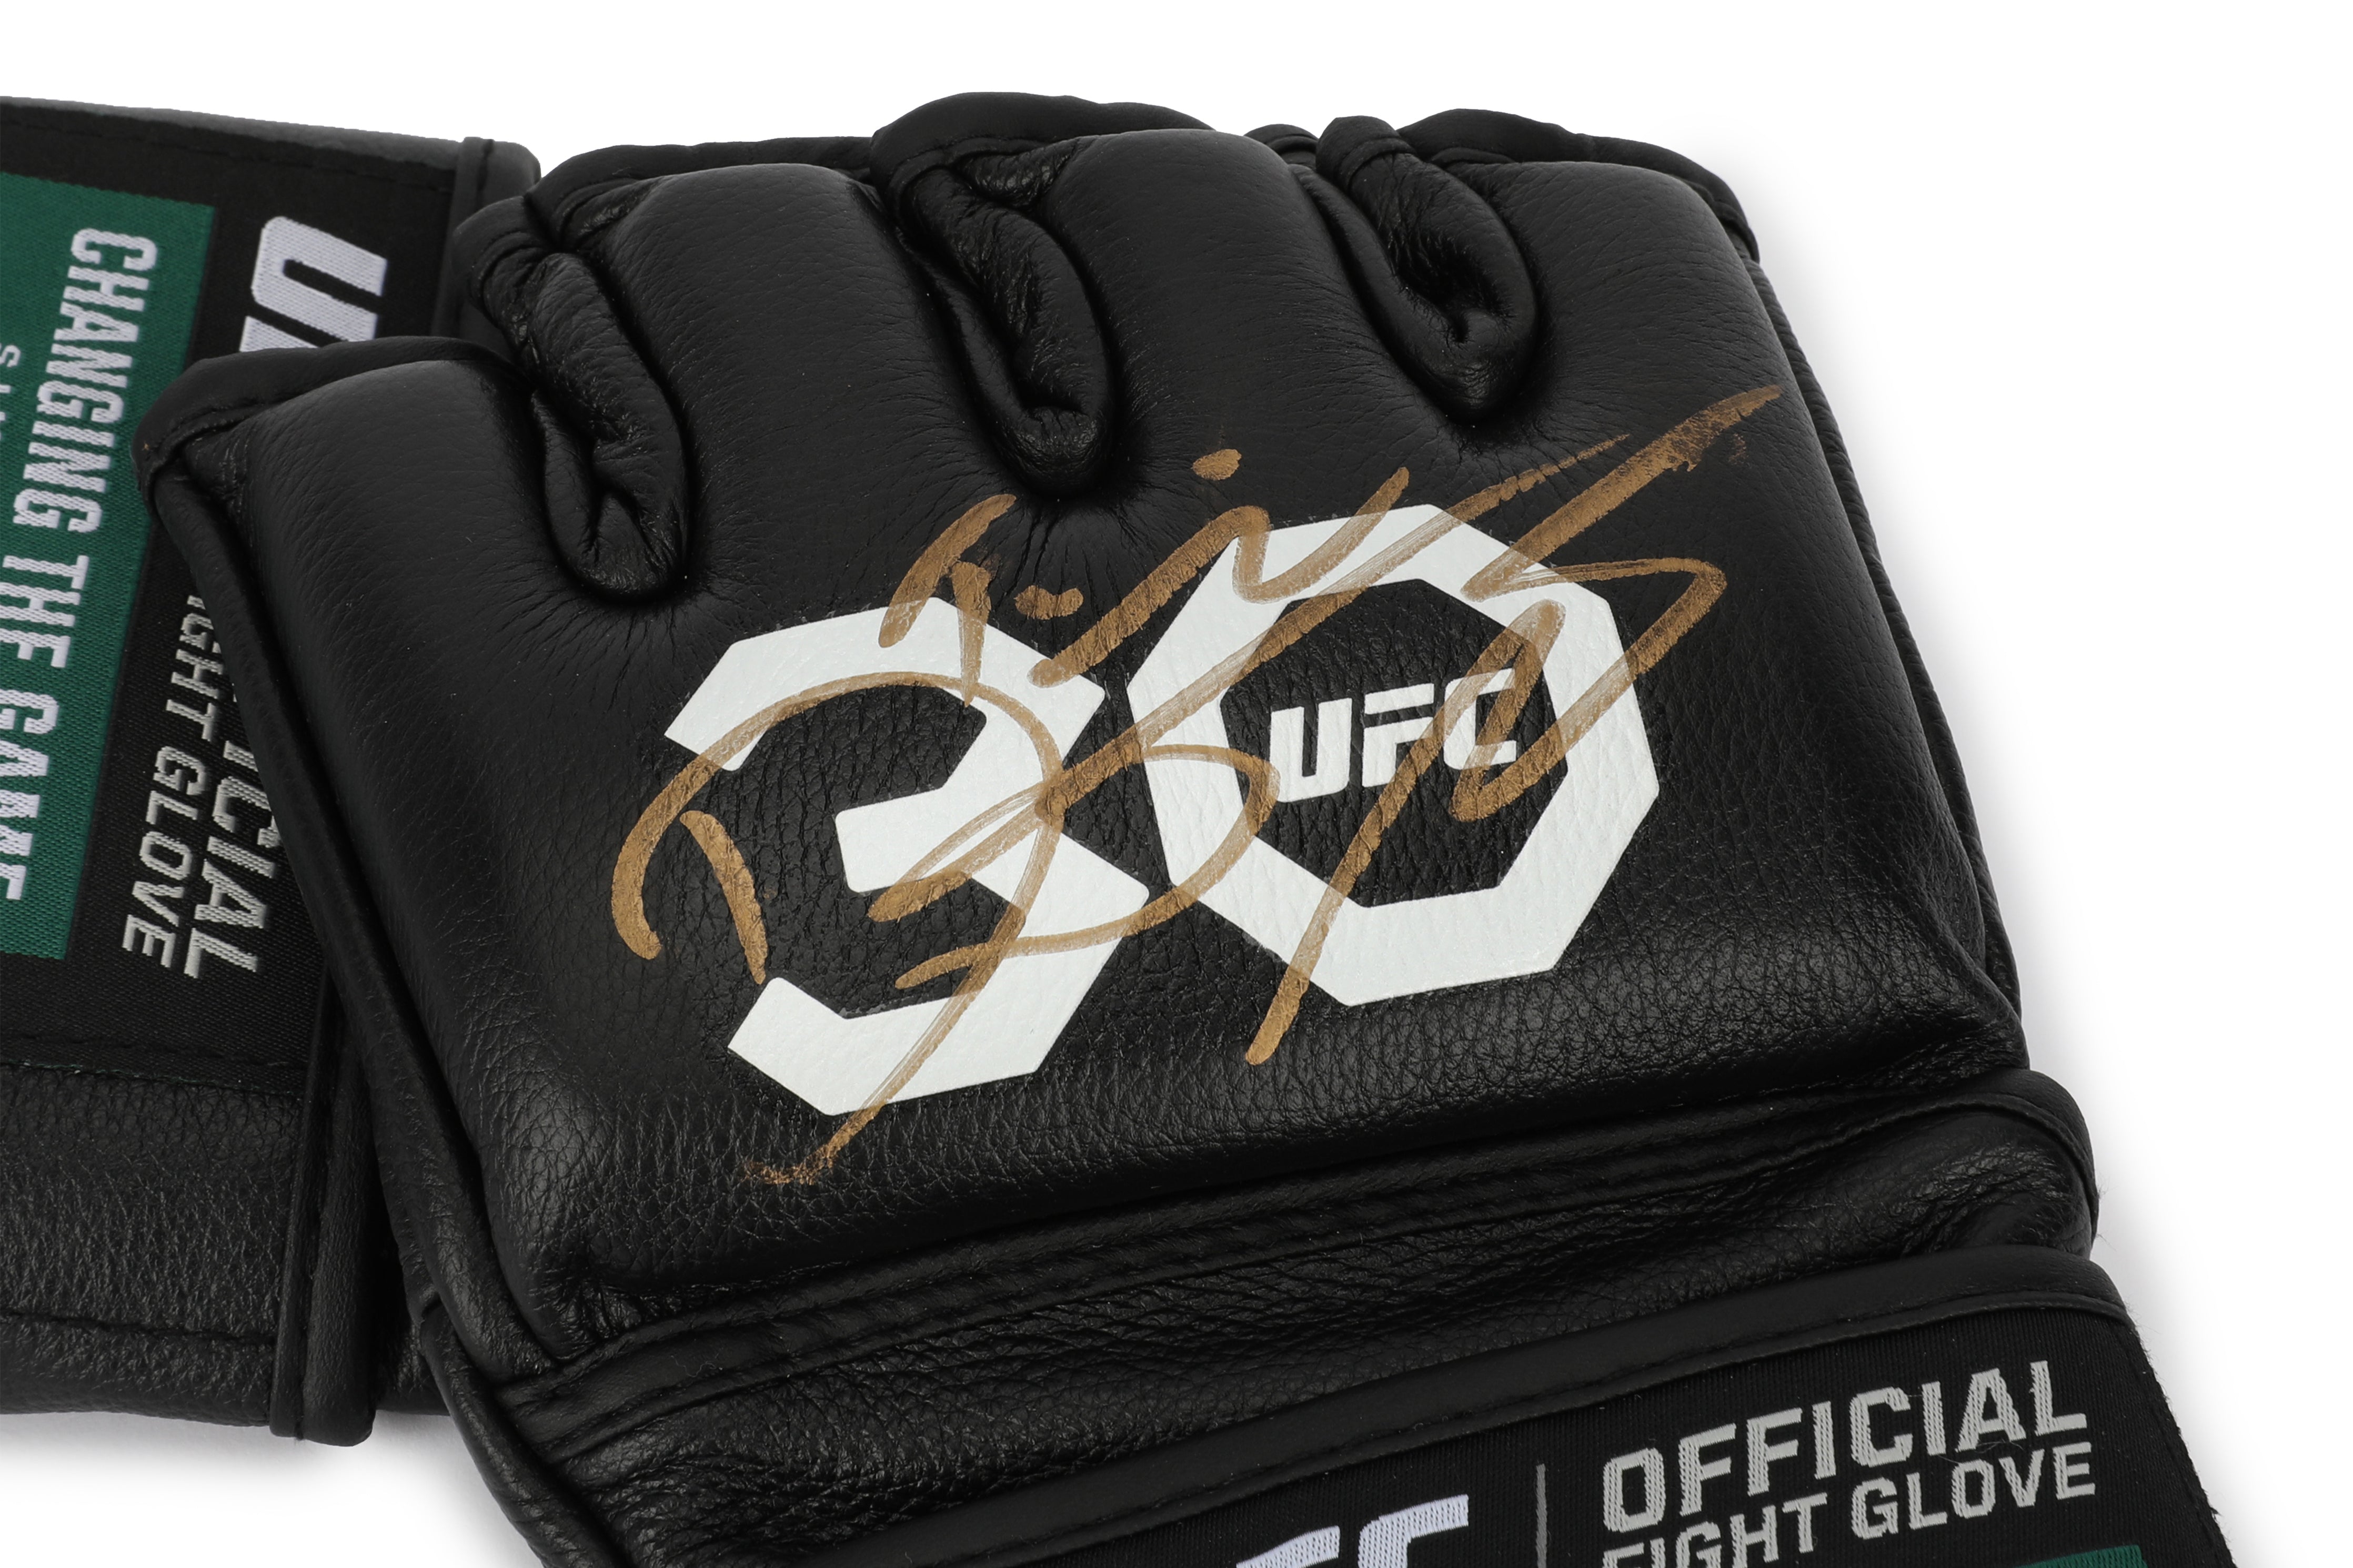 Dustin Poirier Signed Official UFC Gloves – 30th Anniversary Edition